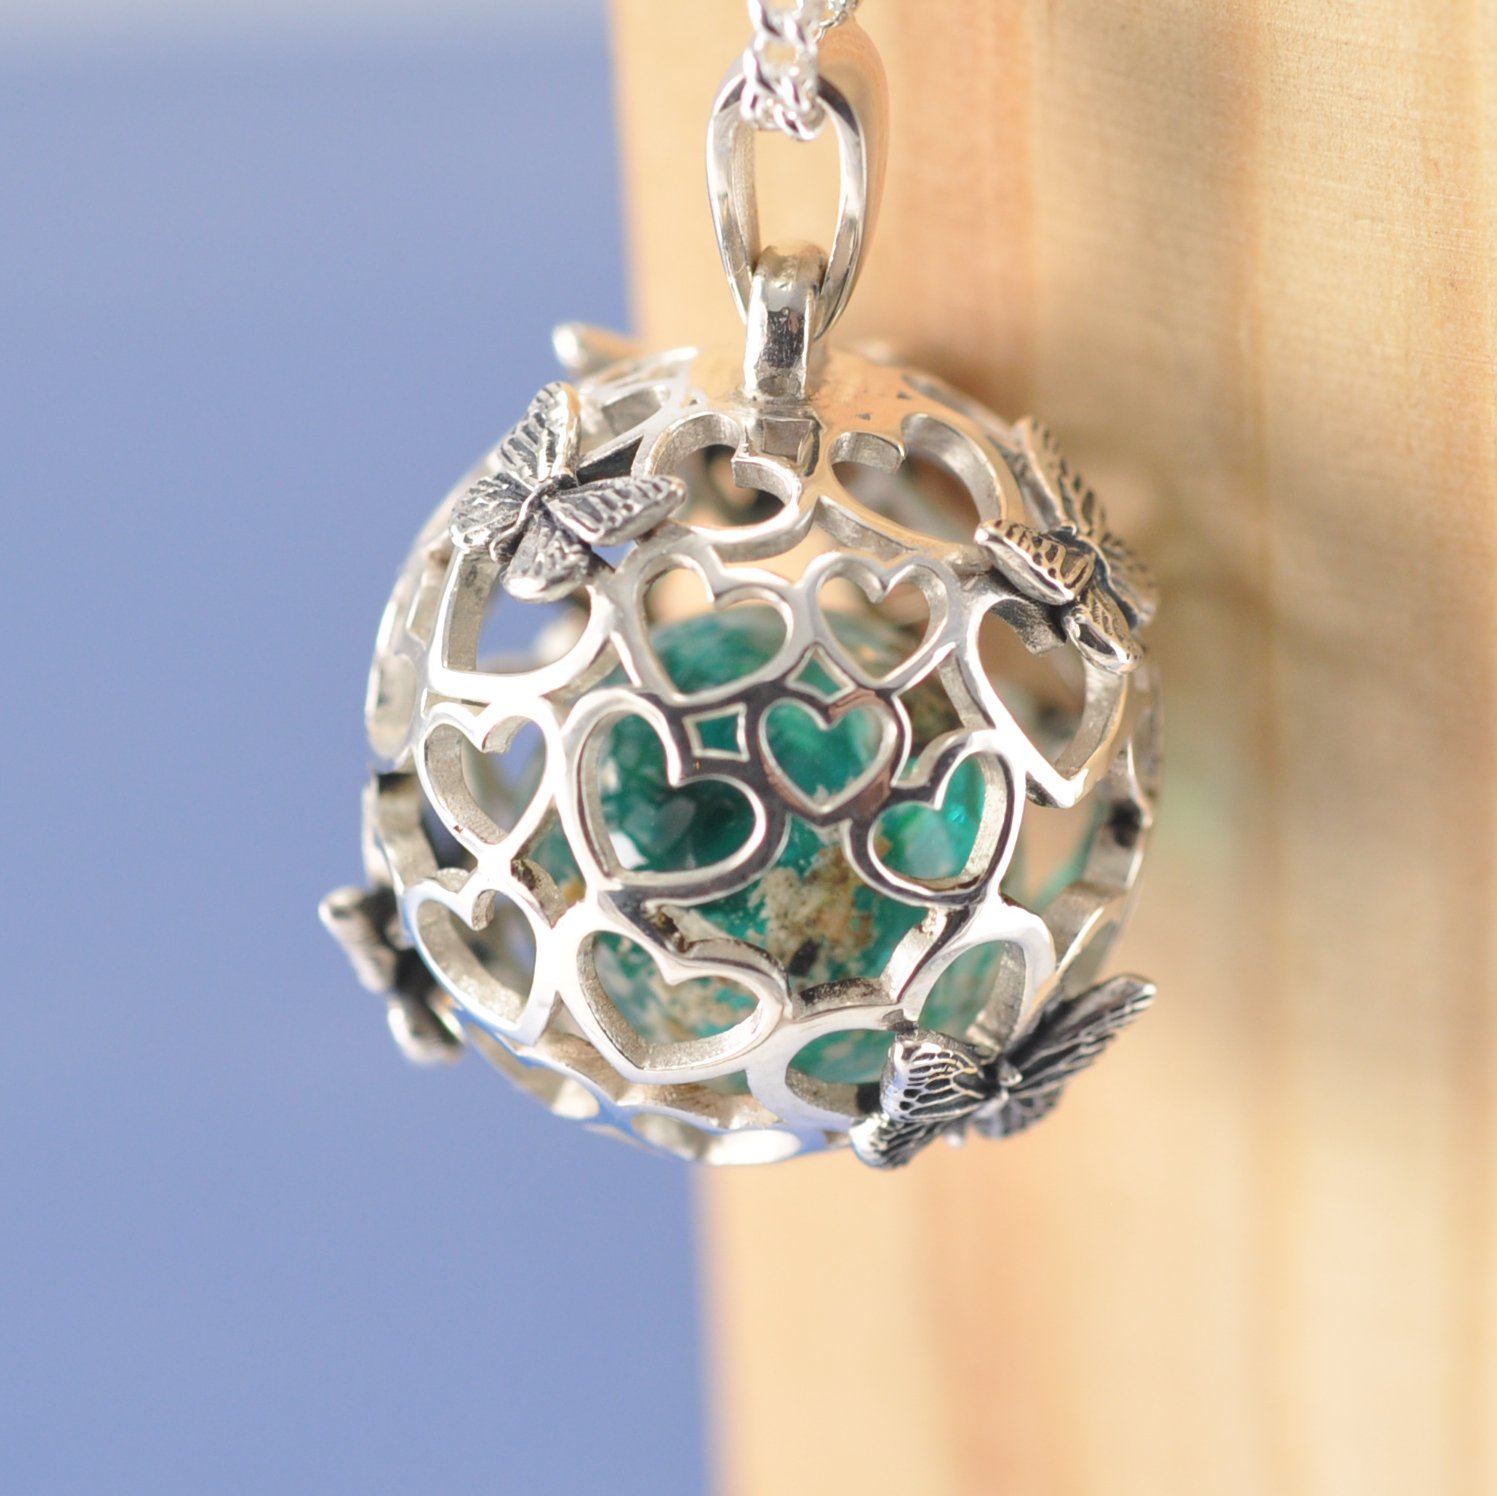 Butterfly Heart Sphere Cremation Ash Marble Necklace Pendant by Chris Parry Jewellery